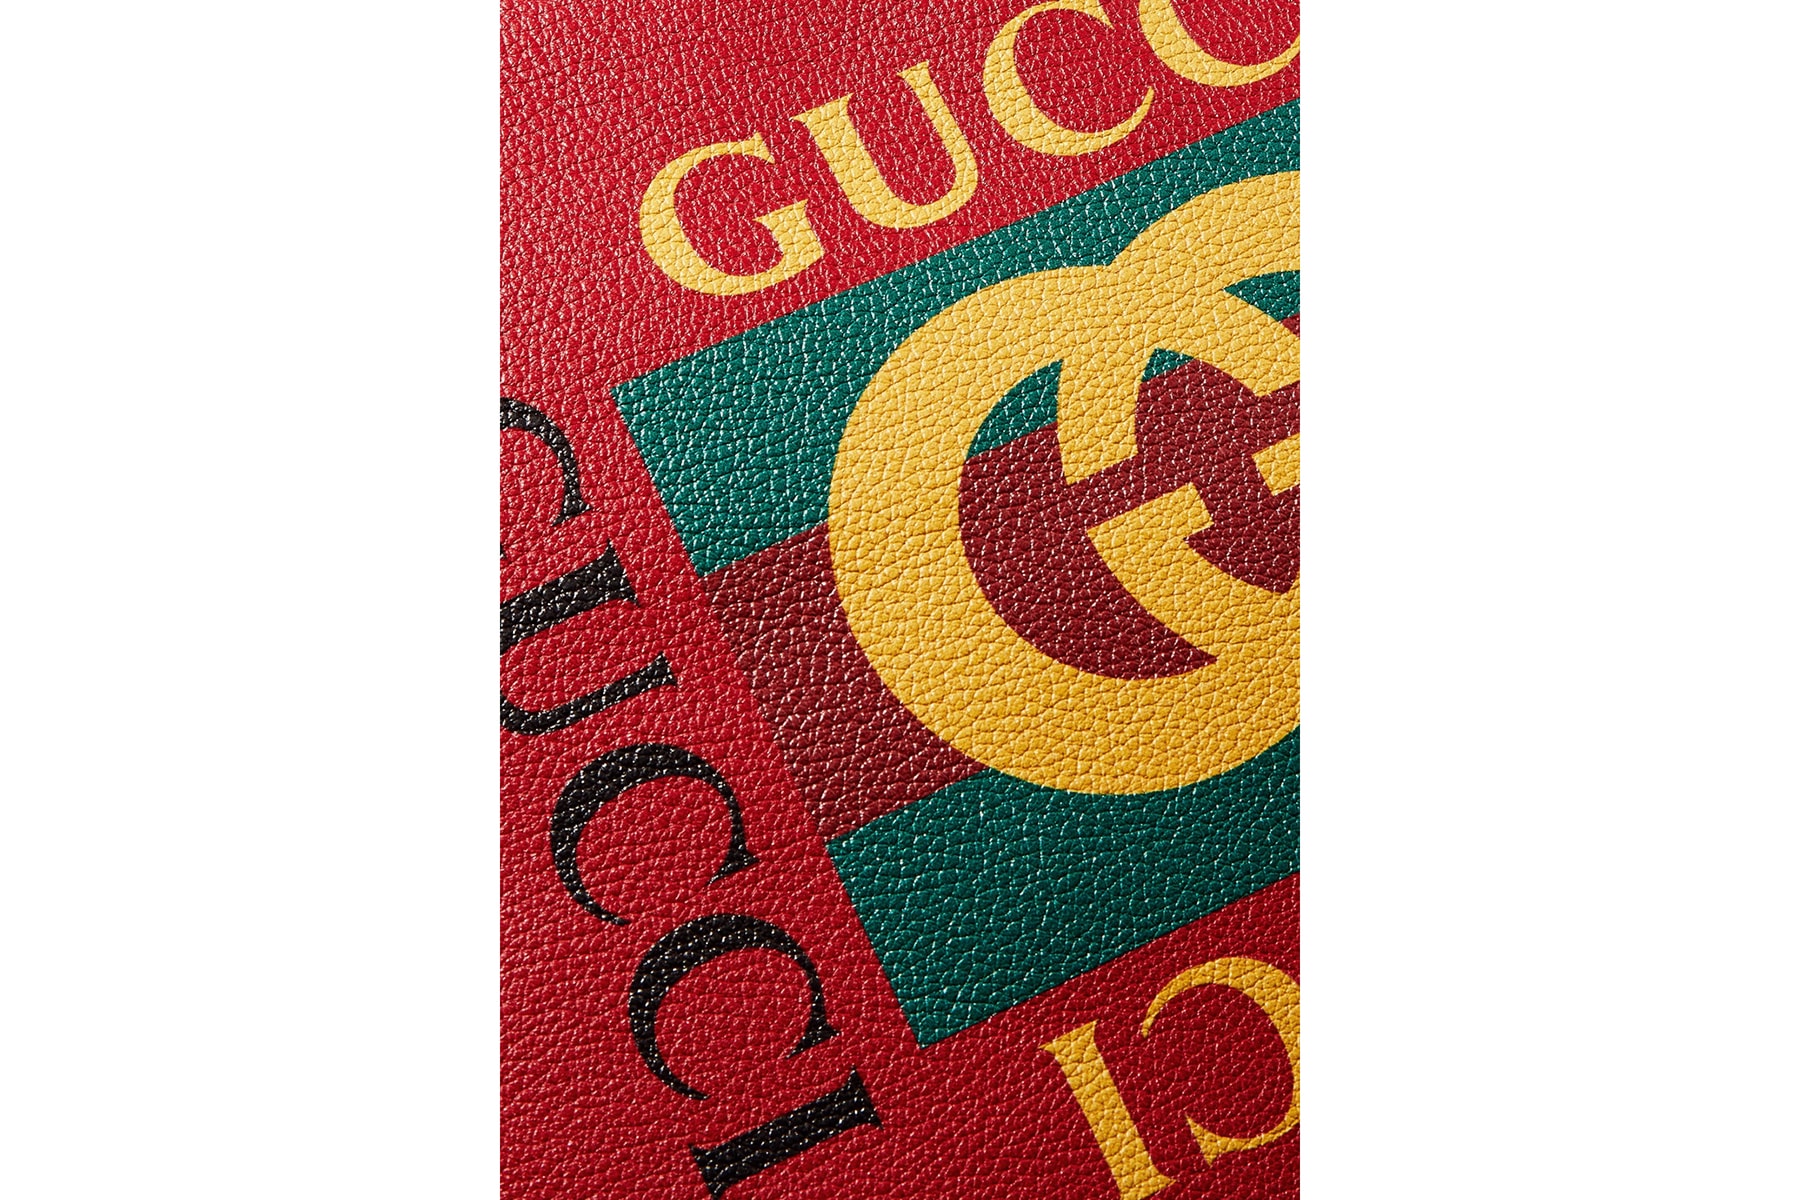 gucci vintage logo red leather pouch hibiscus